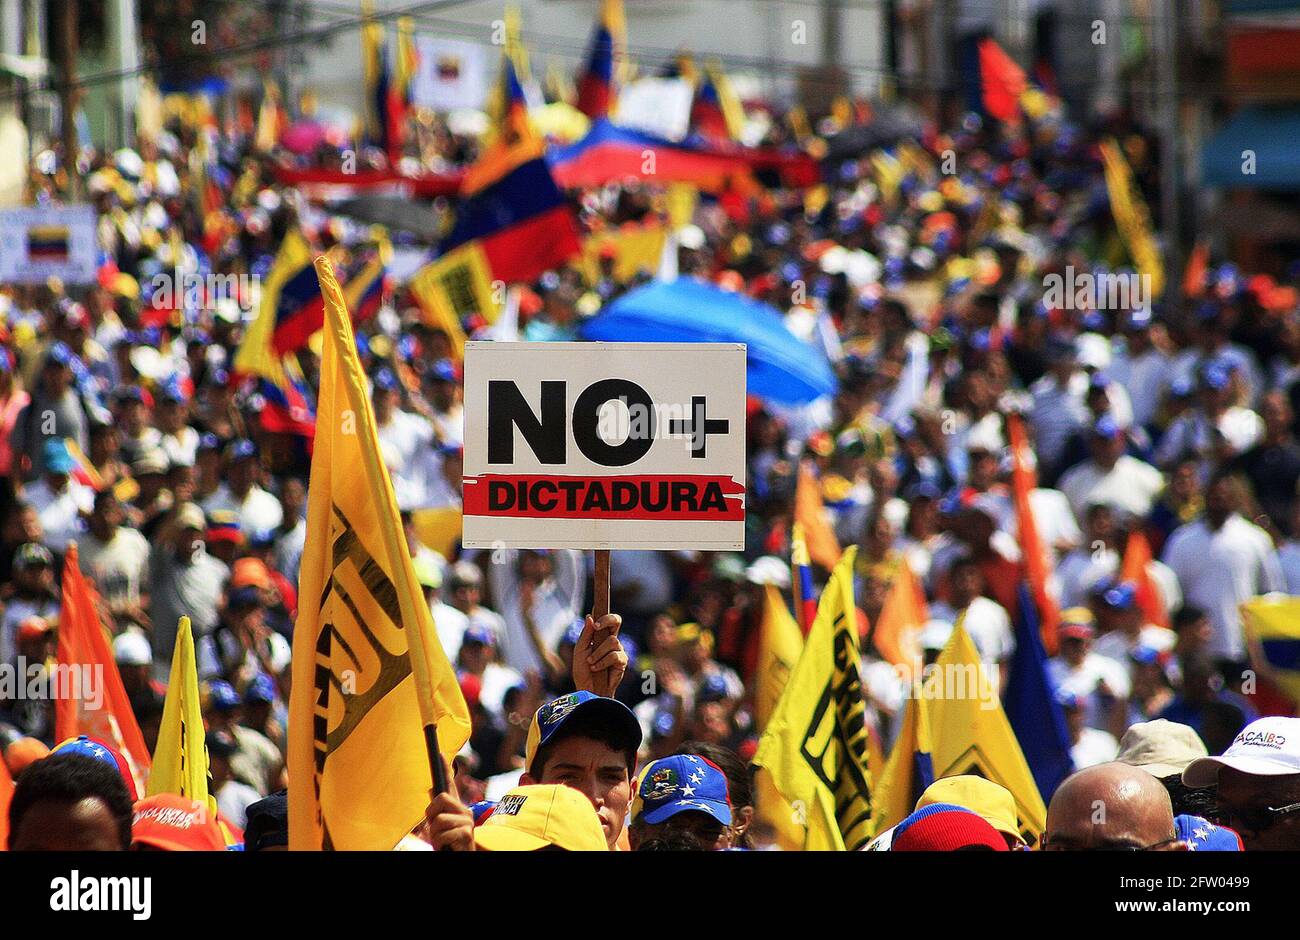 The National Electoral Council (CNE) announces Friday, May 21 in Caracas Venezuela, that the cut of receipt of requests for the megaleclos convened for next November 21 will overcome at 4:00 in the afternoon. The receipt of requests for provisional denomination of parties or organizations for political, national or regional purposes, is carried out for the purpose of promoting the political participation of Venezuelan citizens interested in completing their request. Using the corresponding provisional name application form, which is published on its website, at the National Office of Political Stock Photo